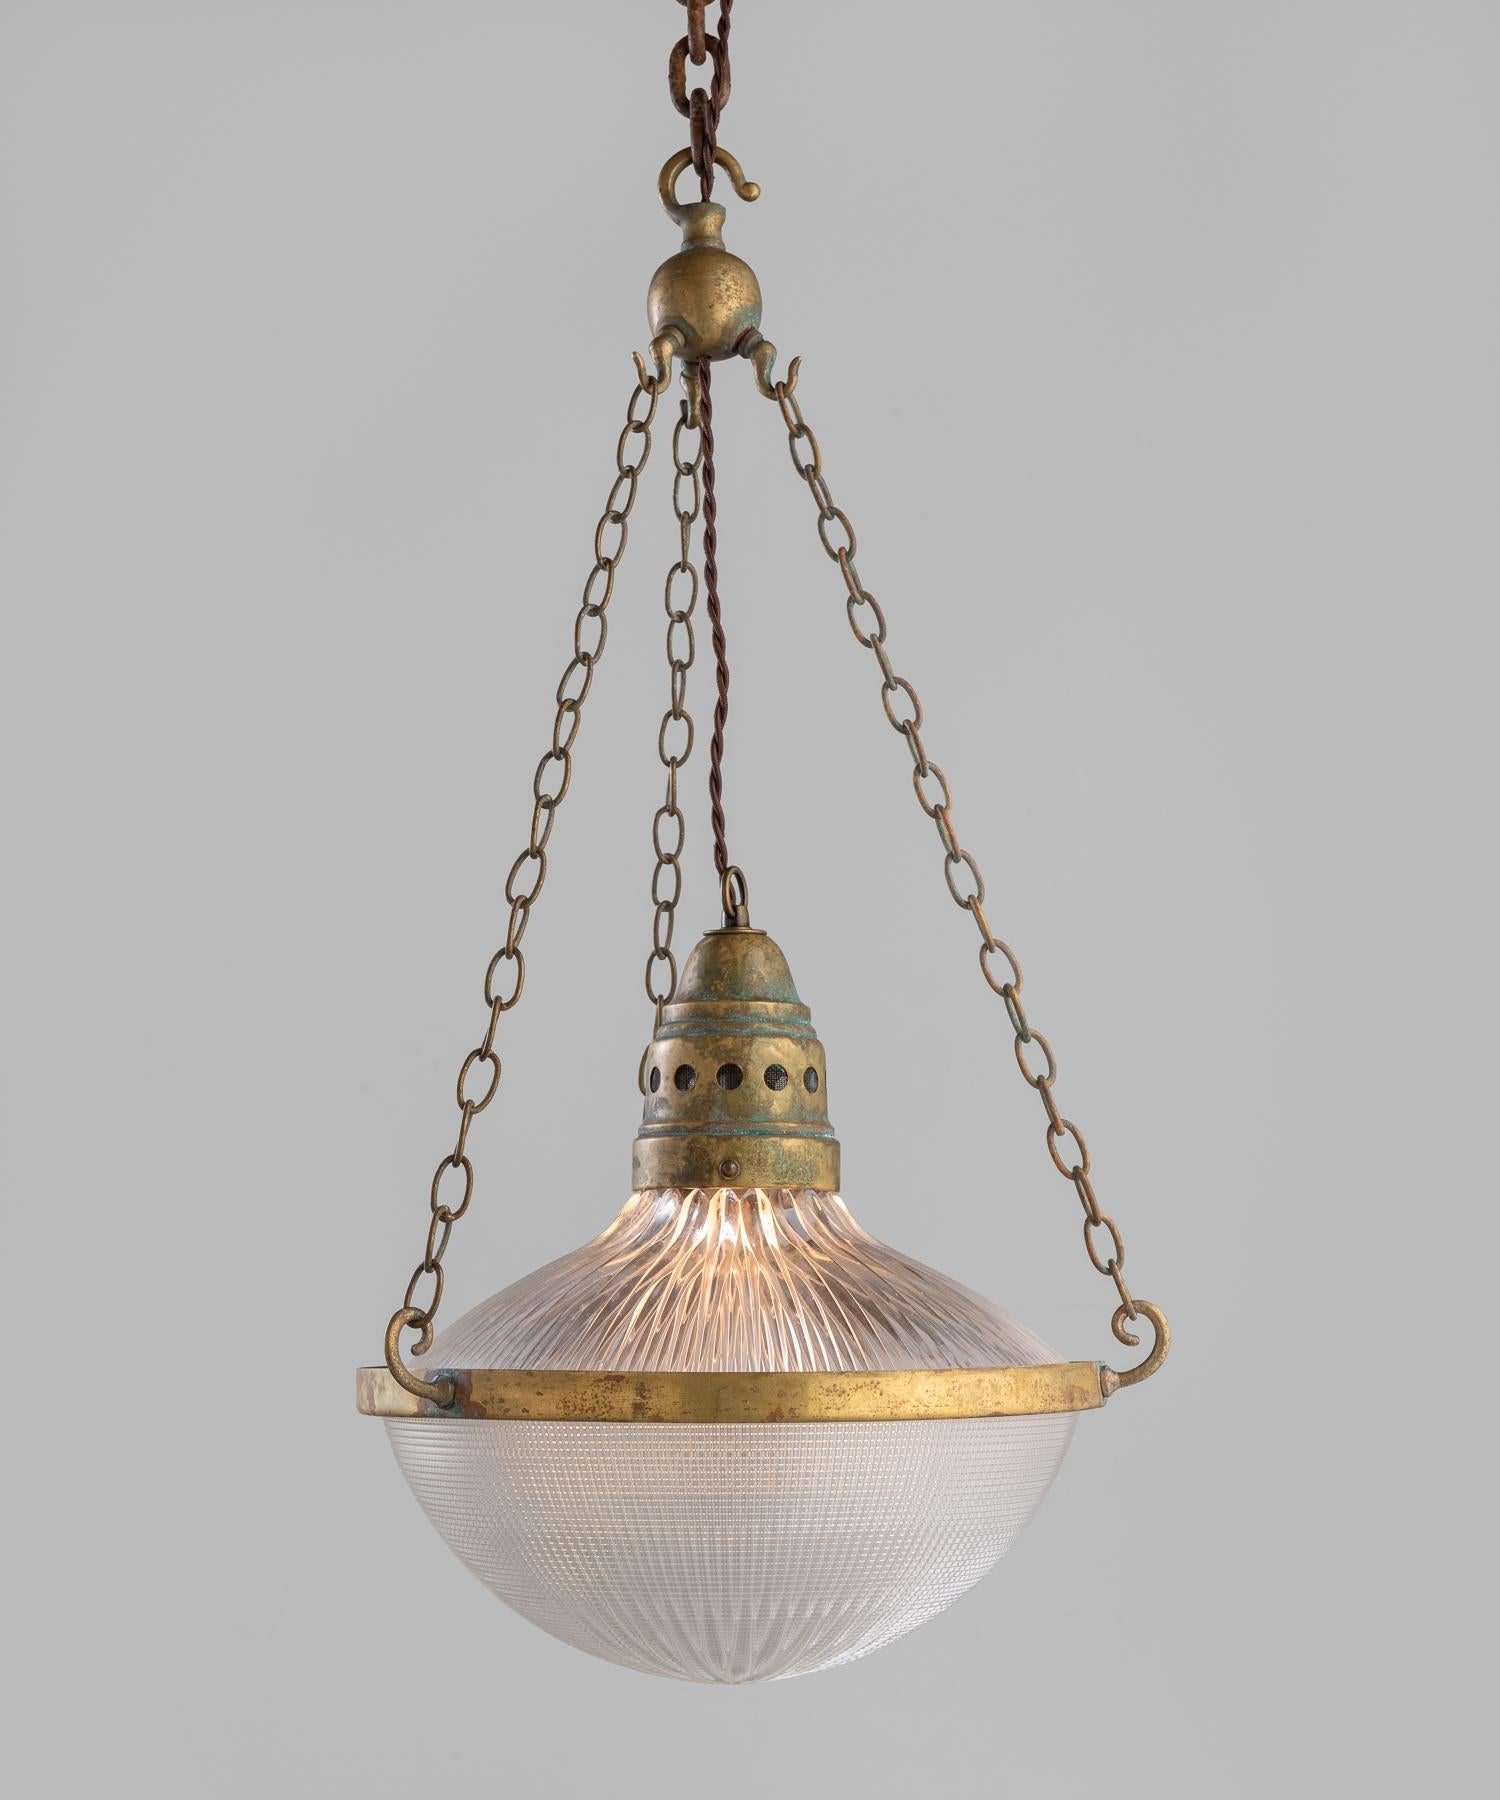 Brass Holophane Lantern, England, circa 1930

Marked holophane glass with original brass central cage and gallery.